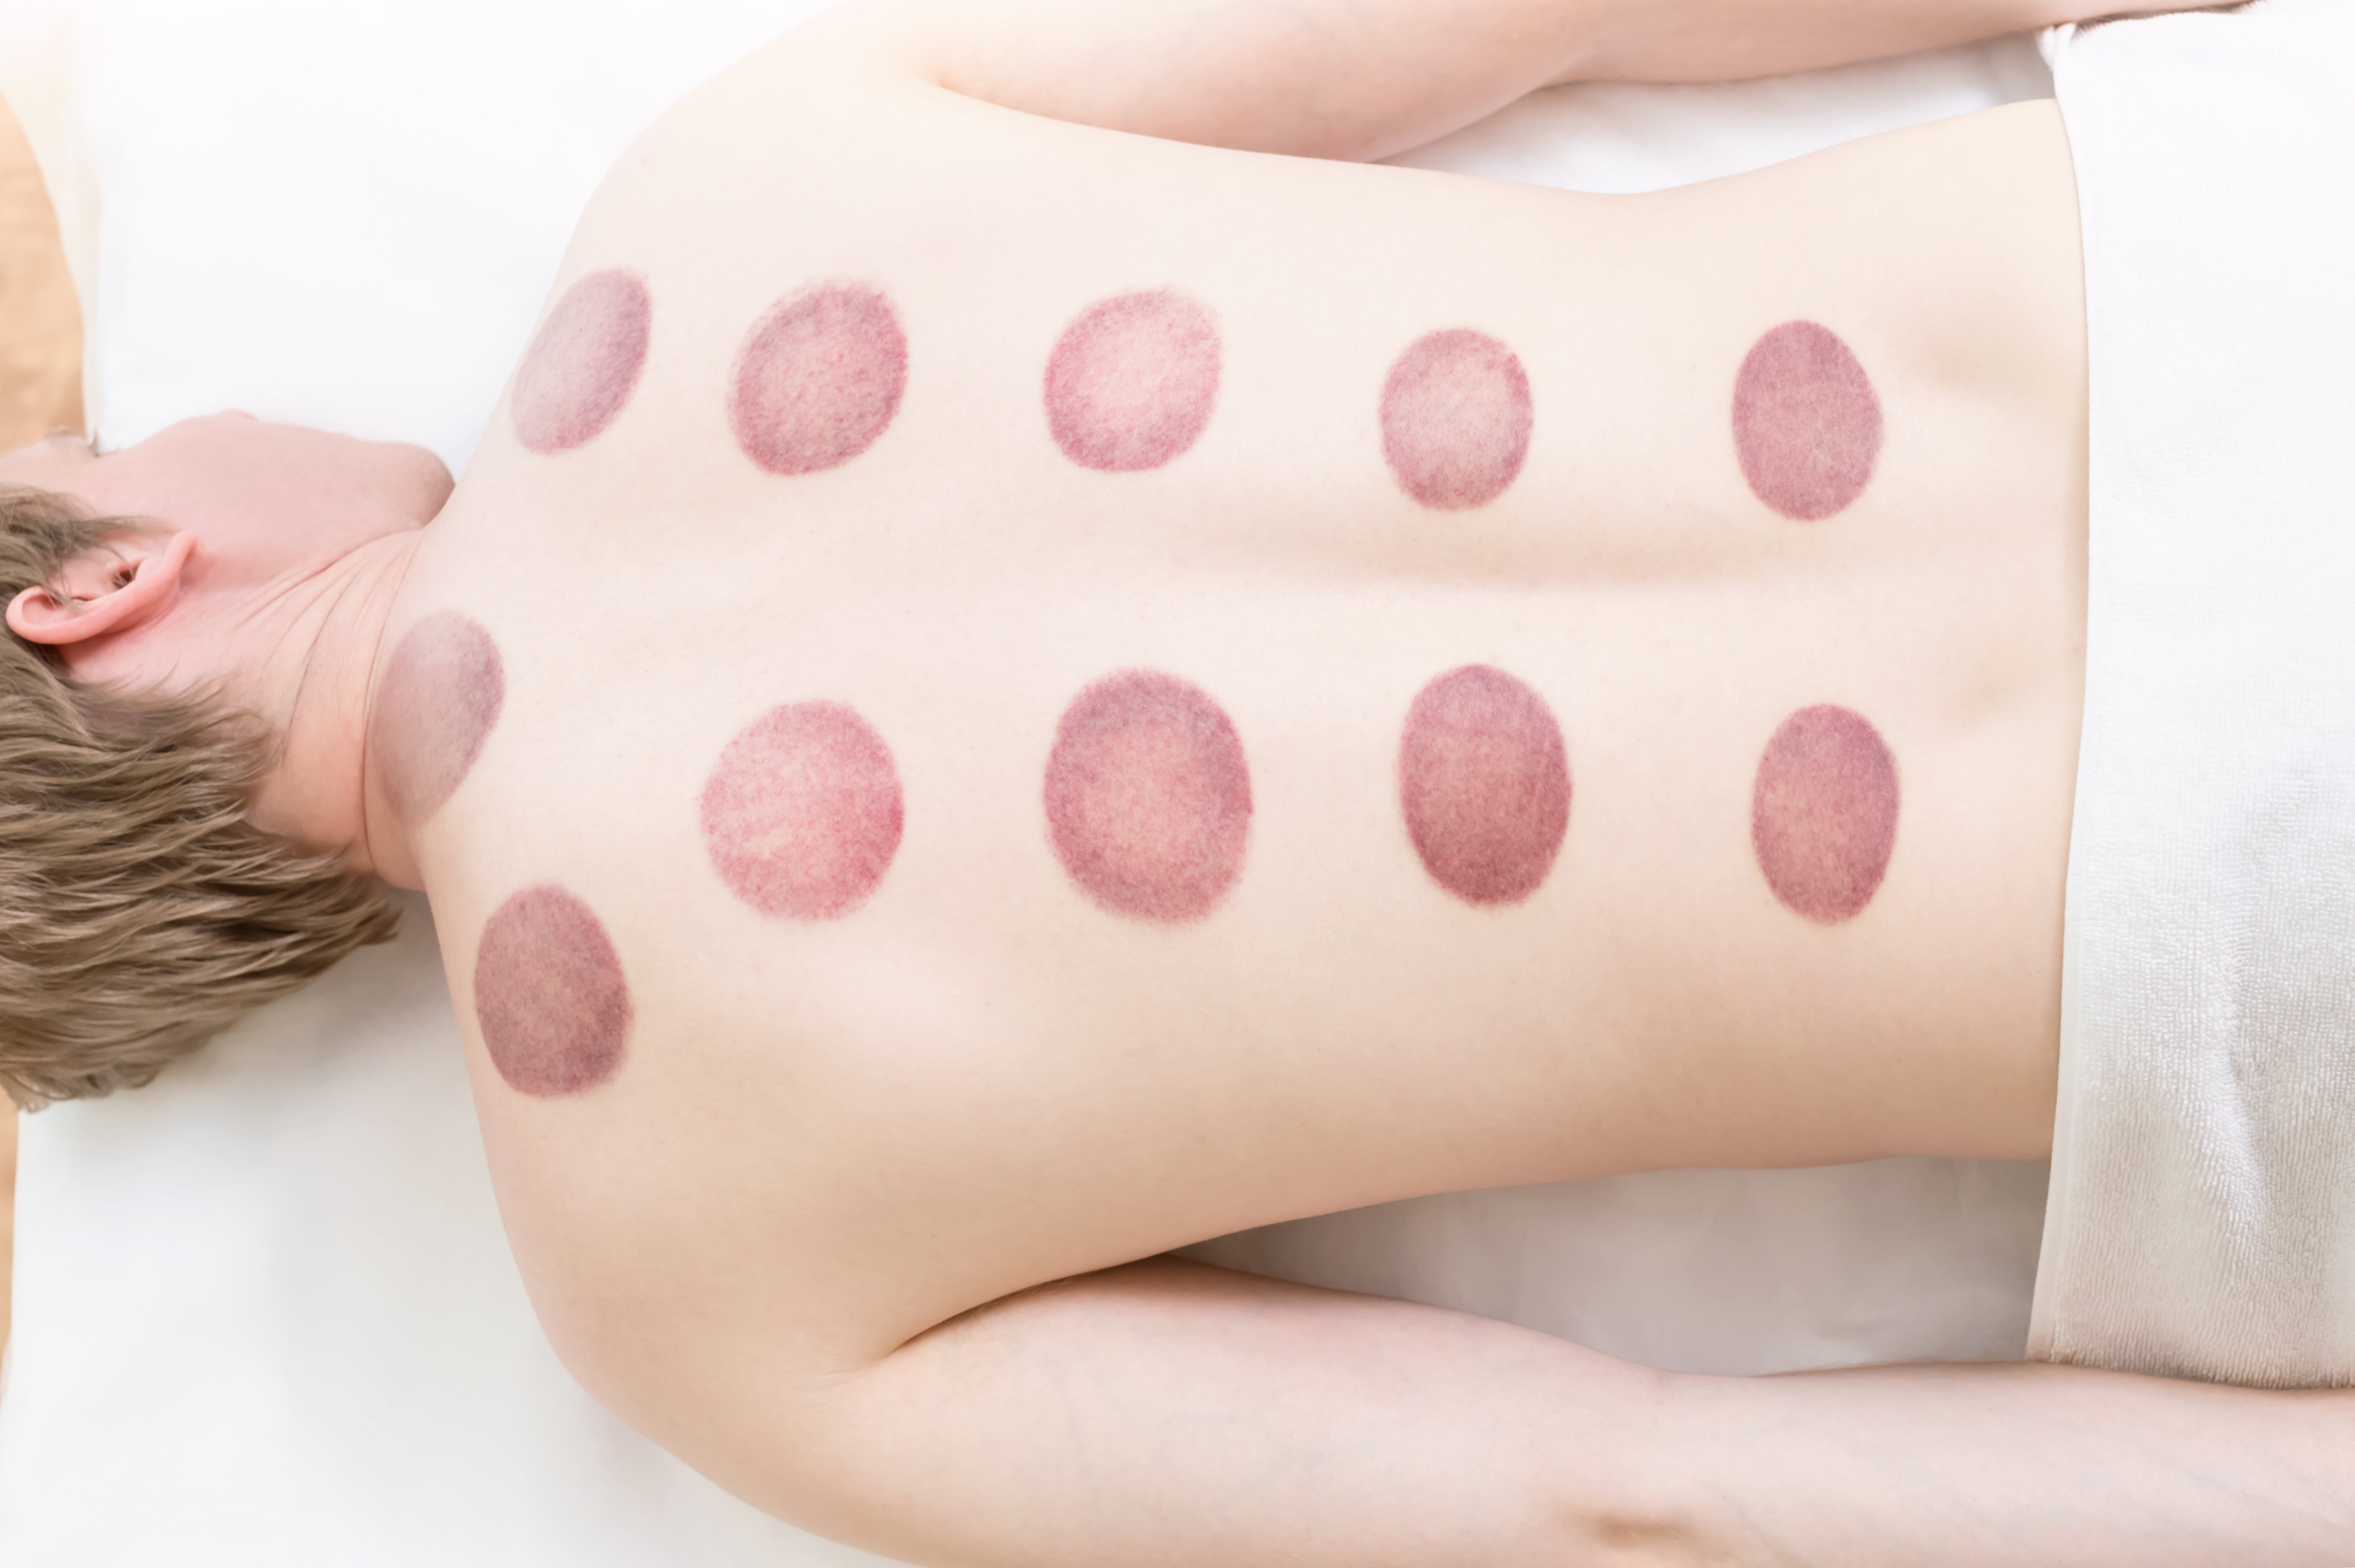 Why Does Cupping Treatment Leave Bruises? Is That Safe?